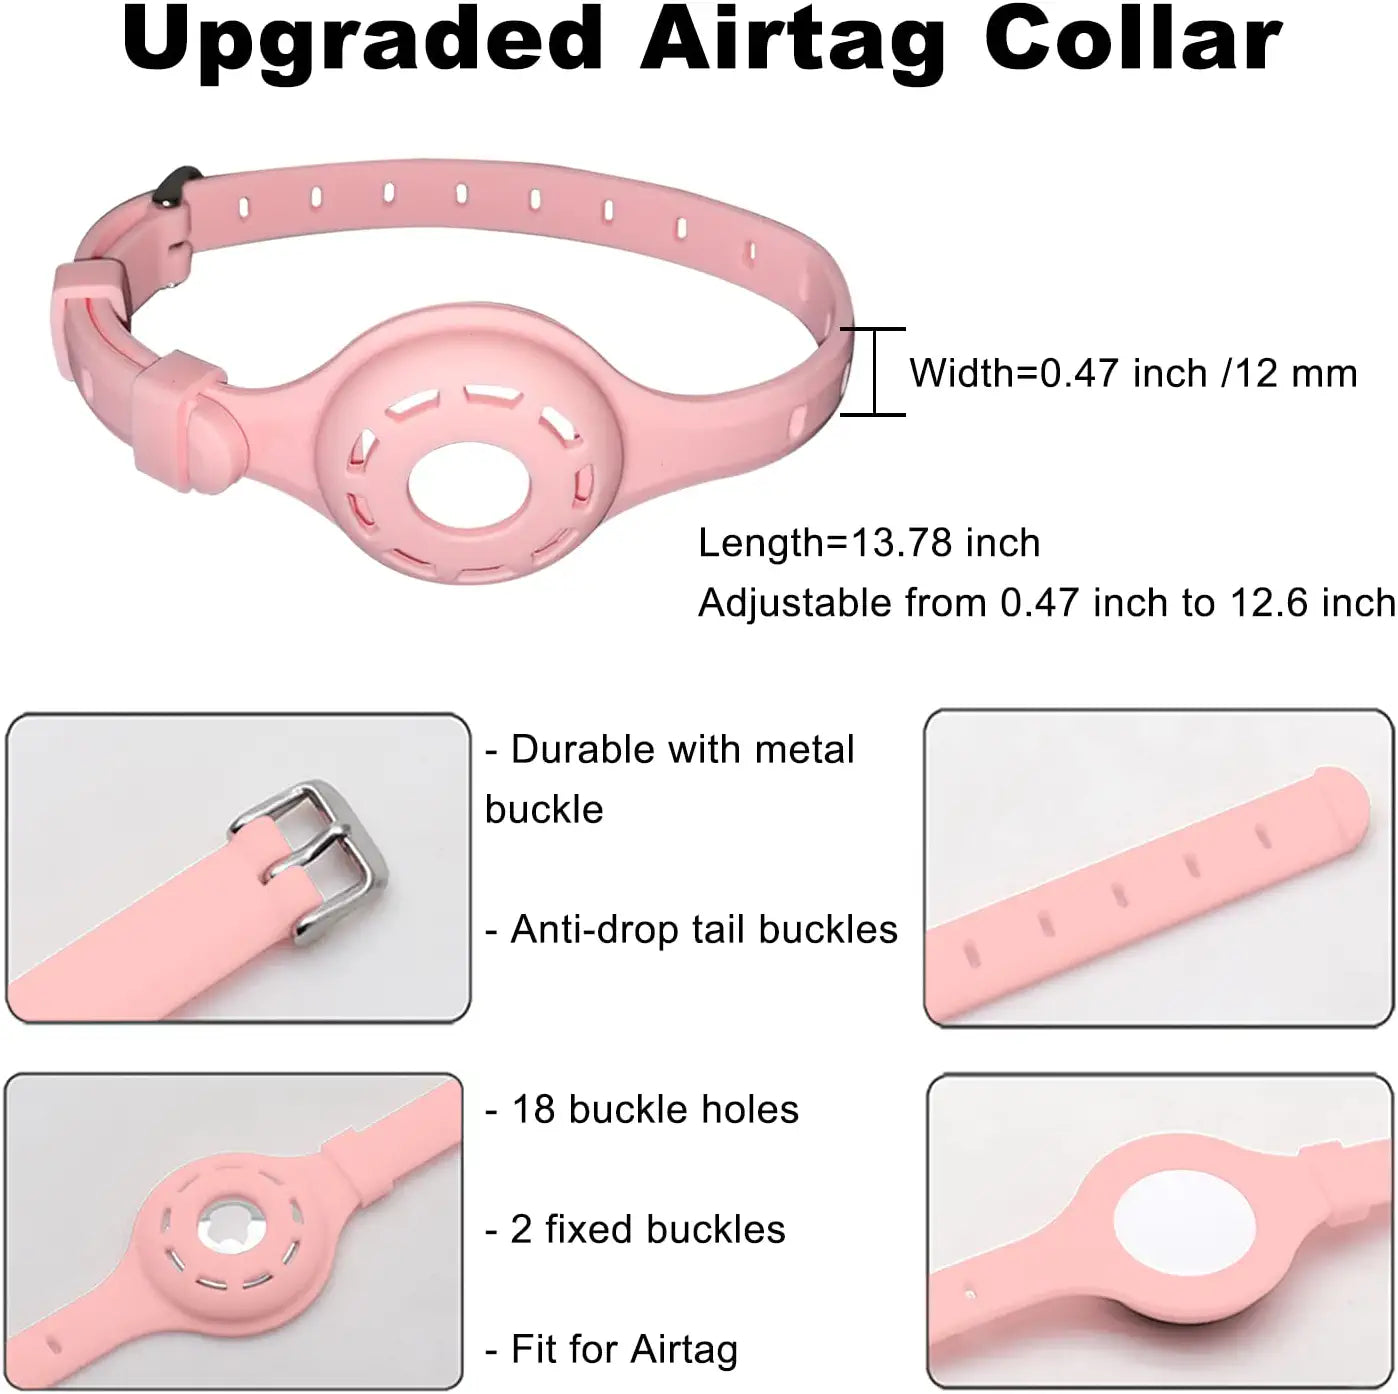 Airtag Cat Collar Airtag Dog Collar Holder with 1 HD Protective Film 4.8-12.8Inch Soft Silicone Dog Collars for Apple Airtag on Small Cats Small Dogs (Pink)